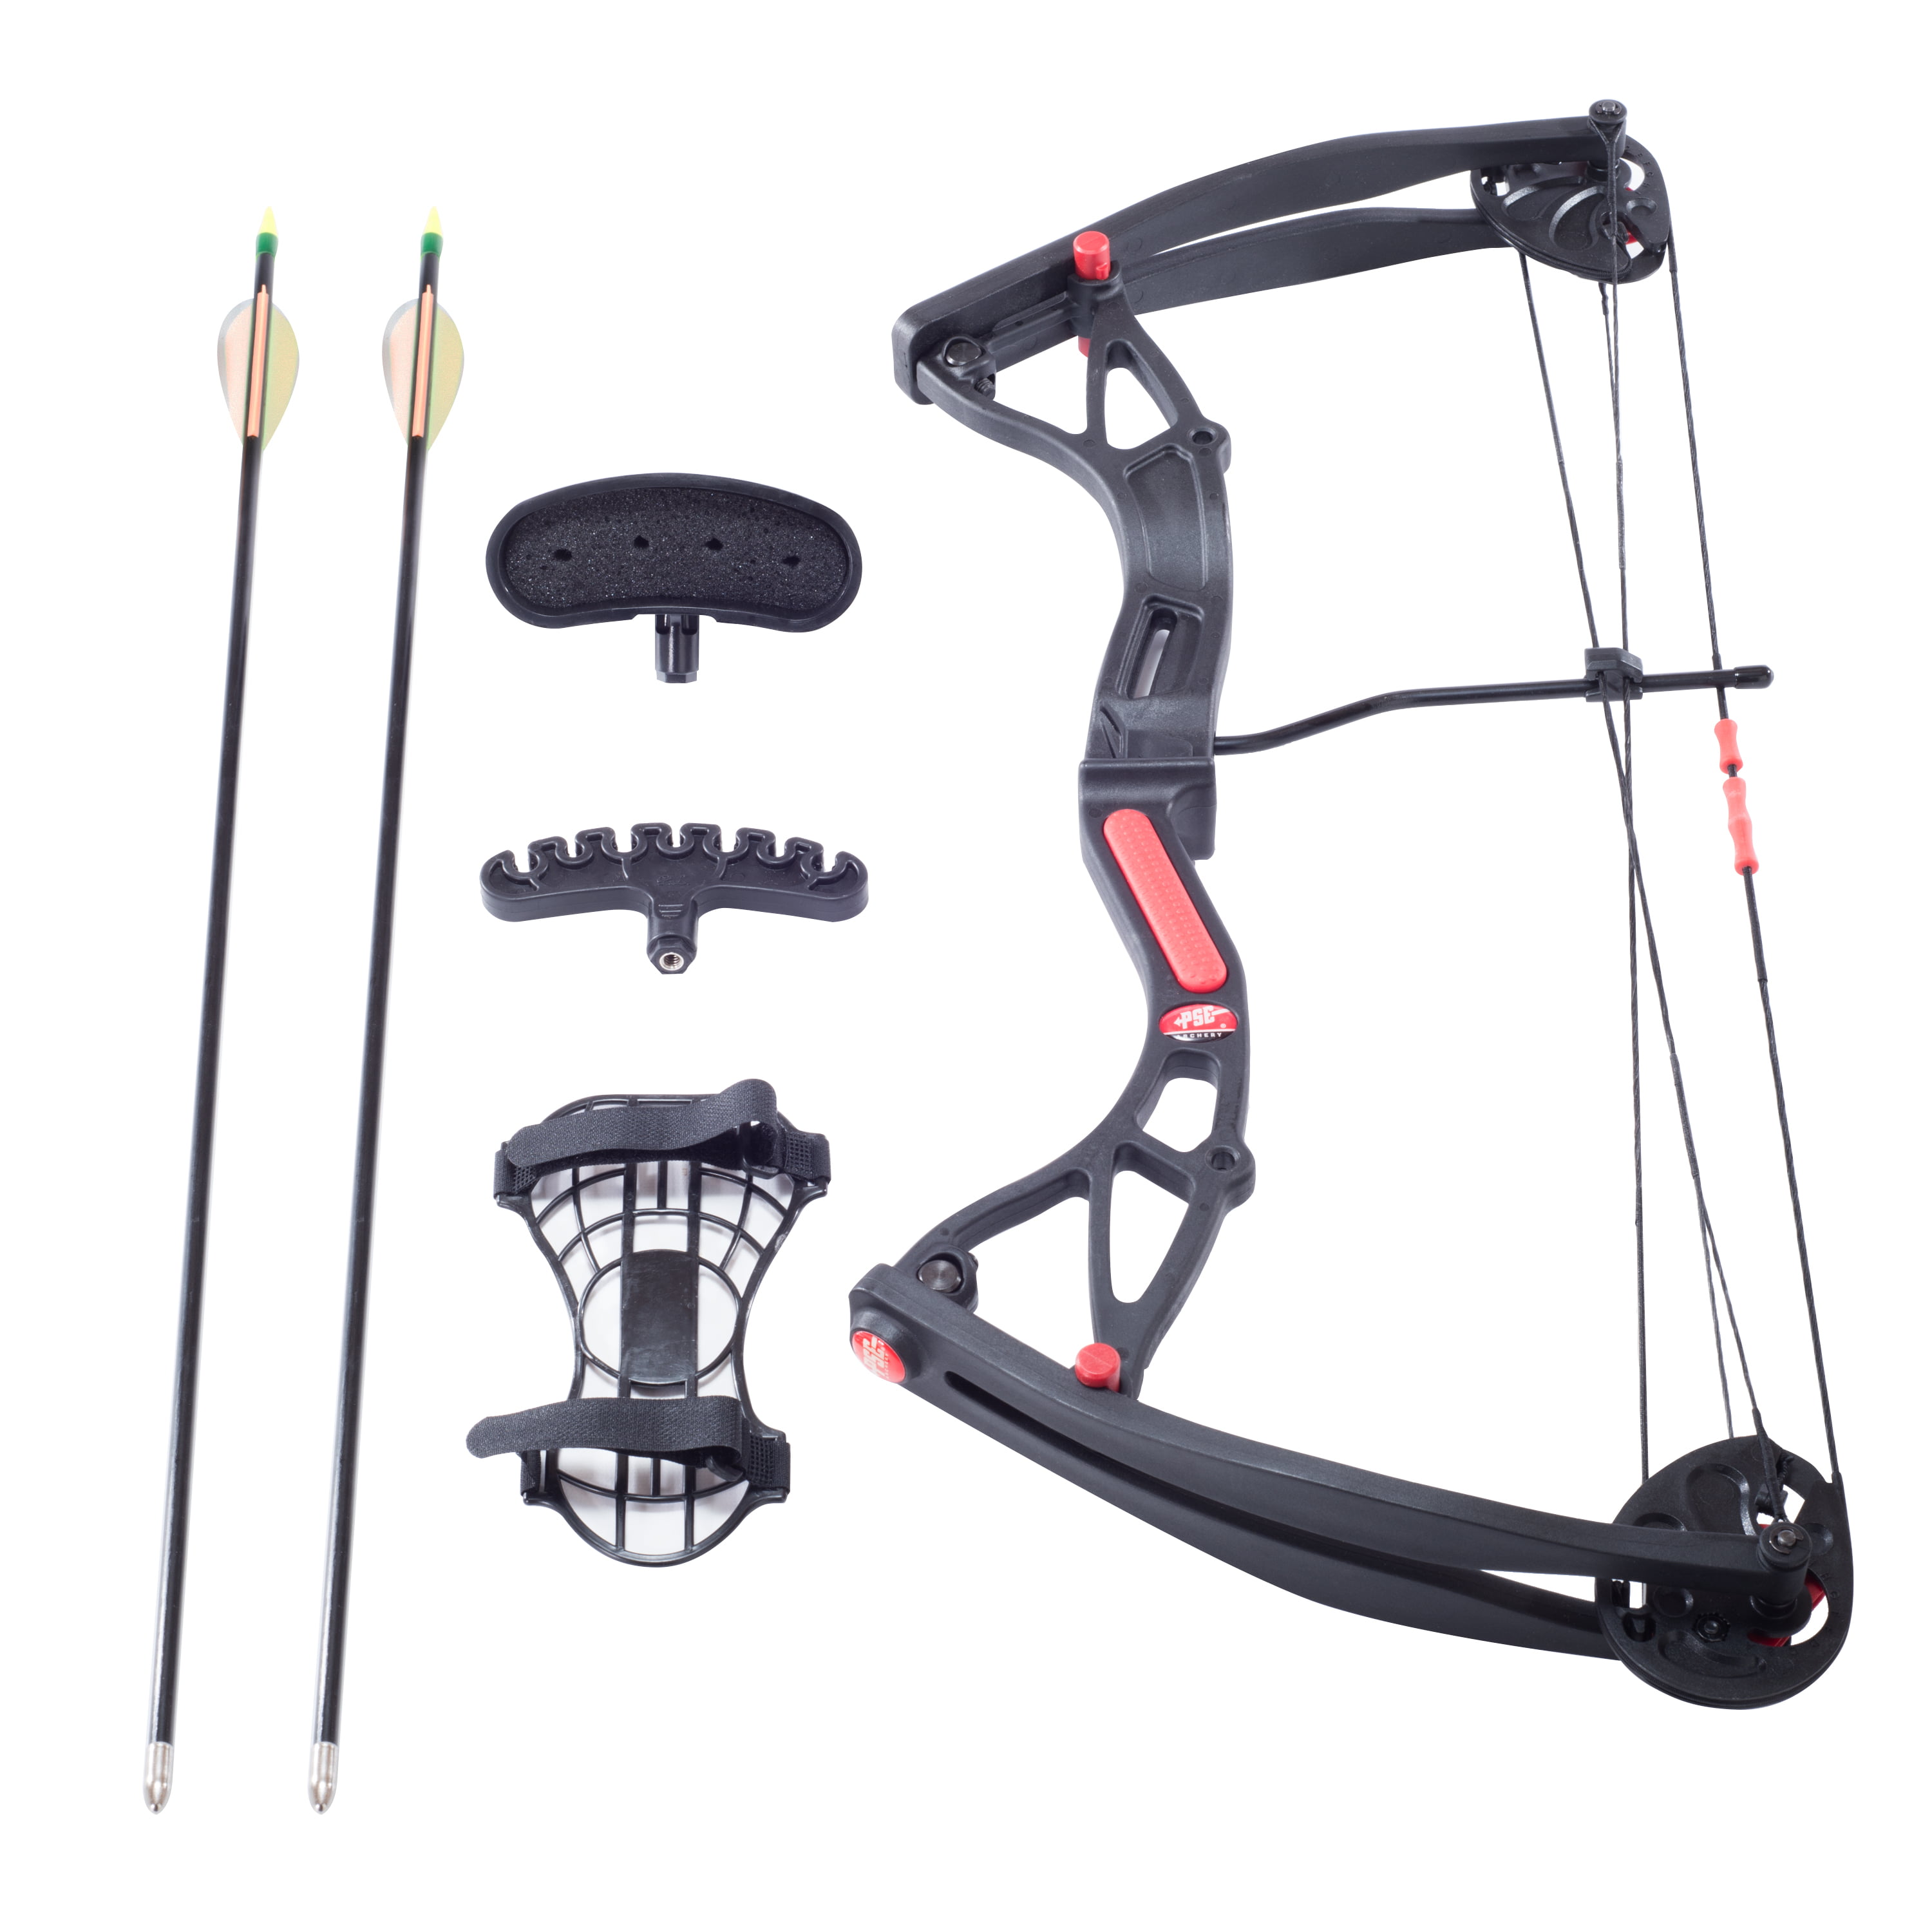 Details about   Youth 15-29lb Pro Compound Right Hand Bow Kit & 30" Carbon Archery Arrow Hunting 